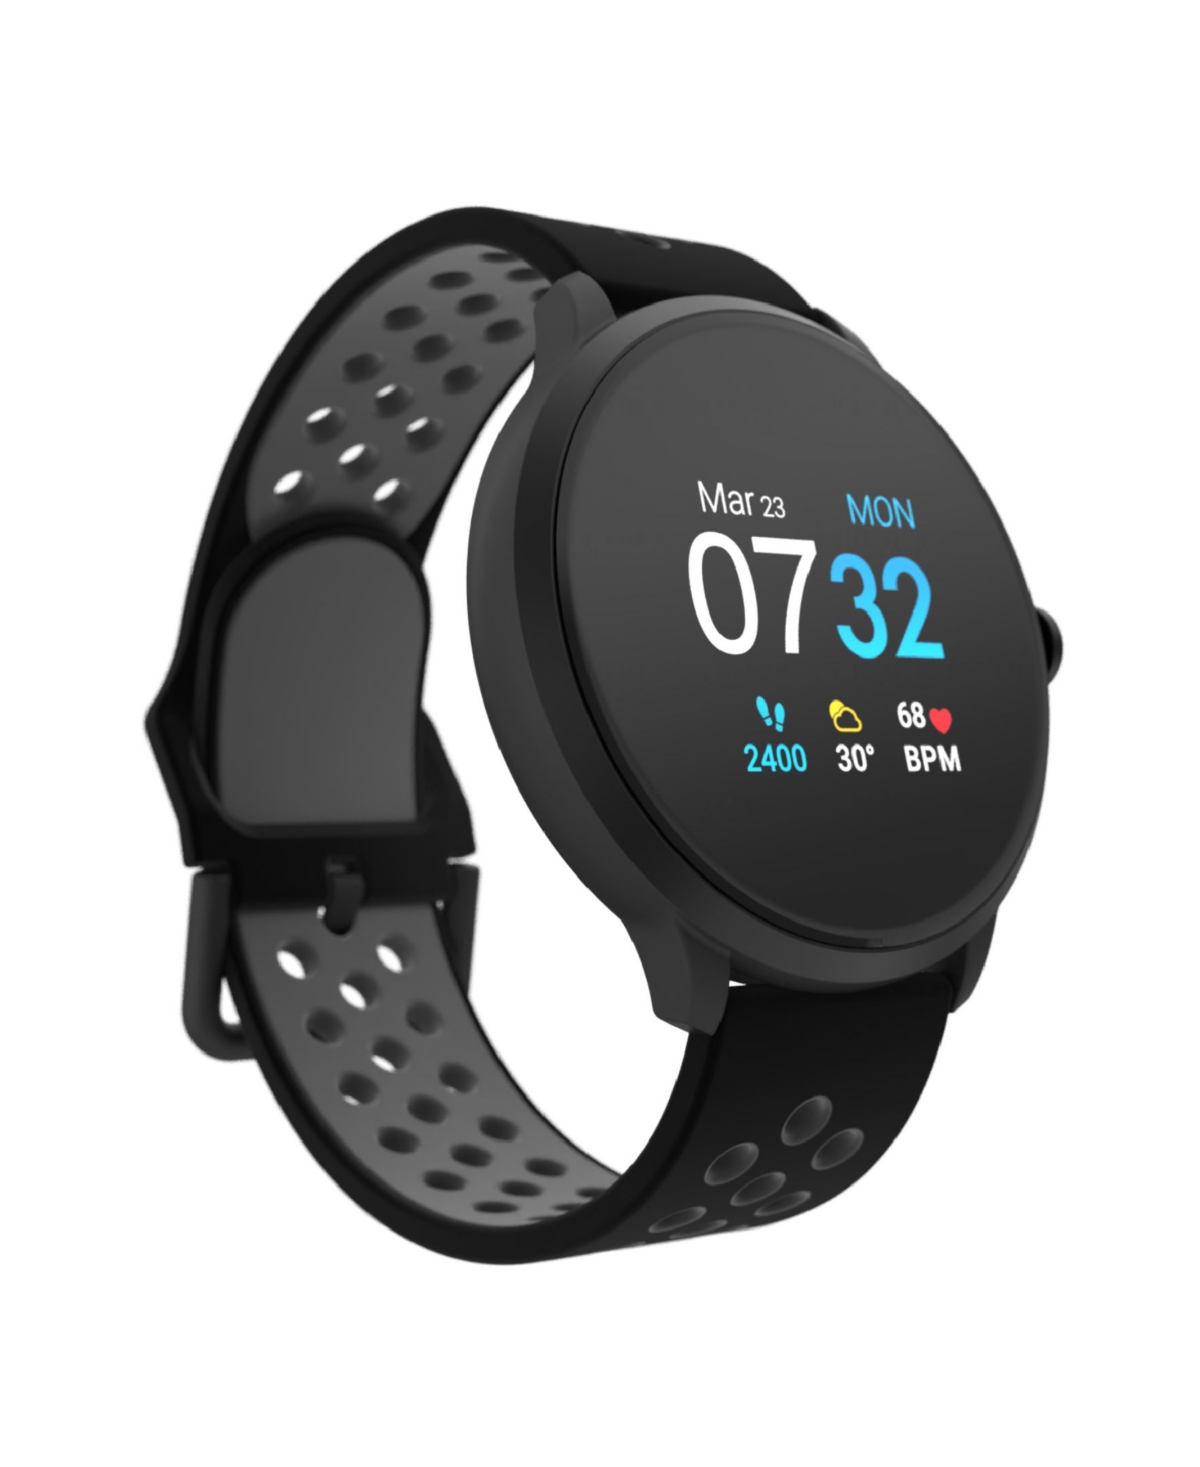 Itouch Sport 3 Unisex Touchscreen Smartwatch: Black Case with Black/Gray Perforated Strap 45mm